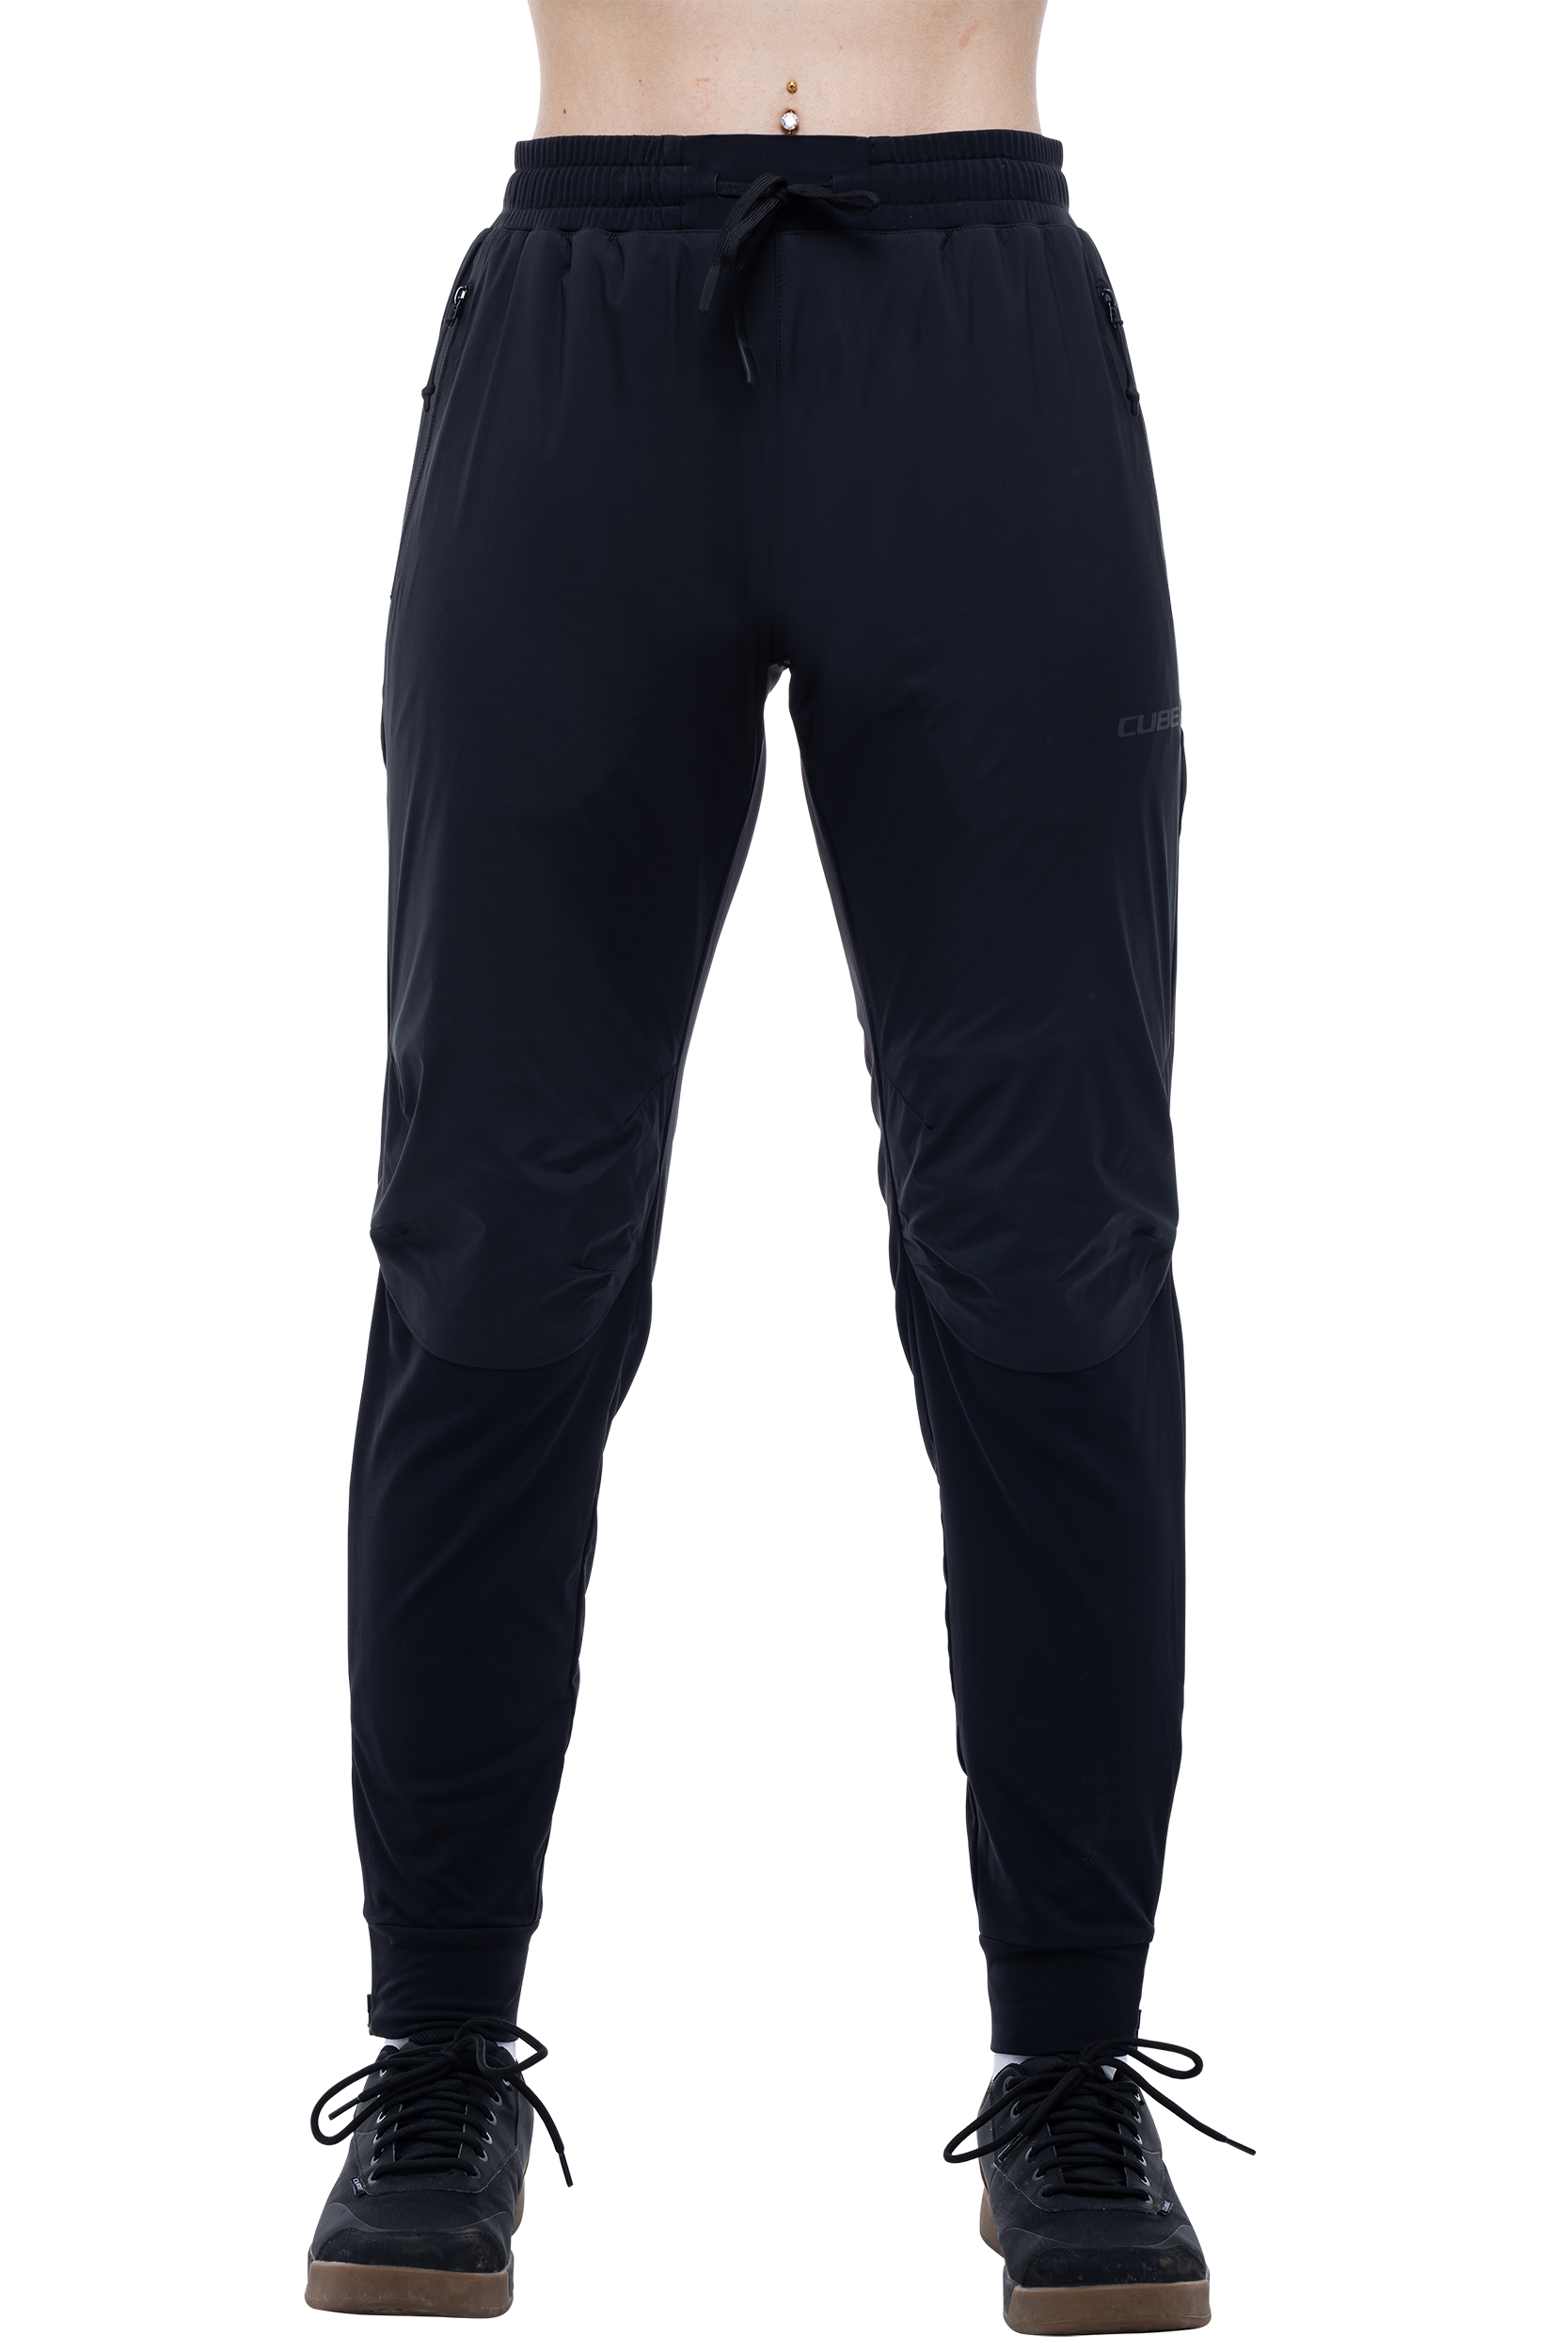 CUBE ATX WS Pants All-Weather